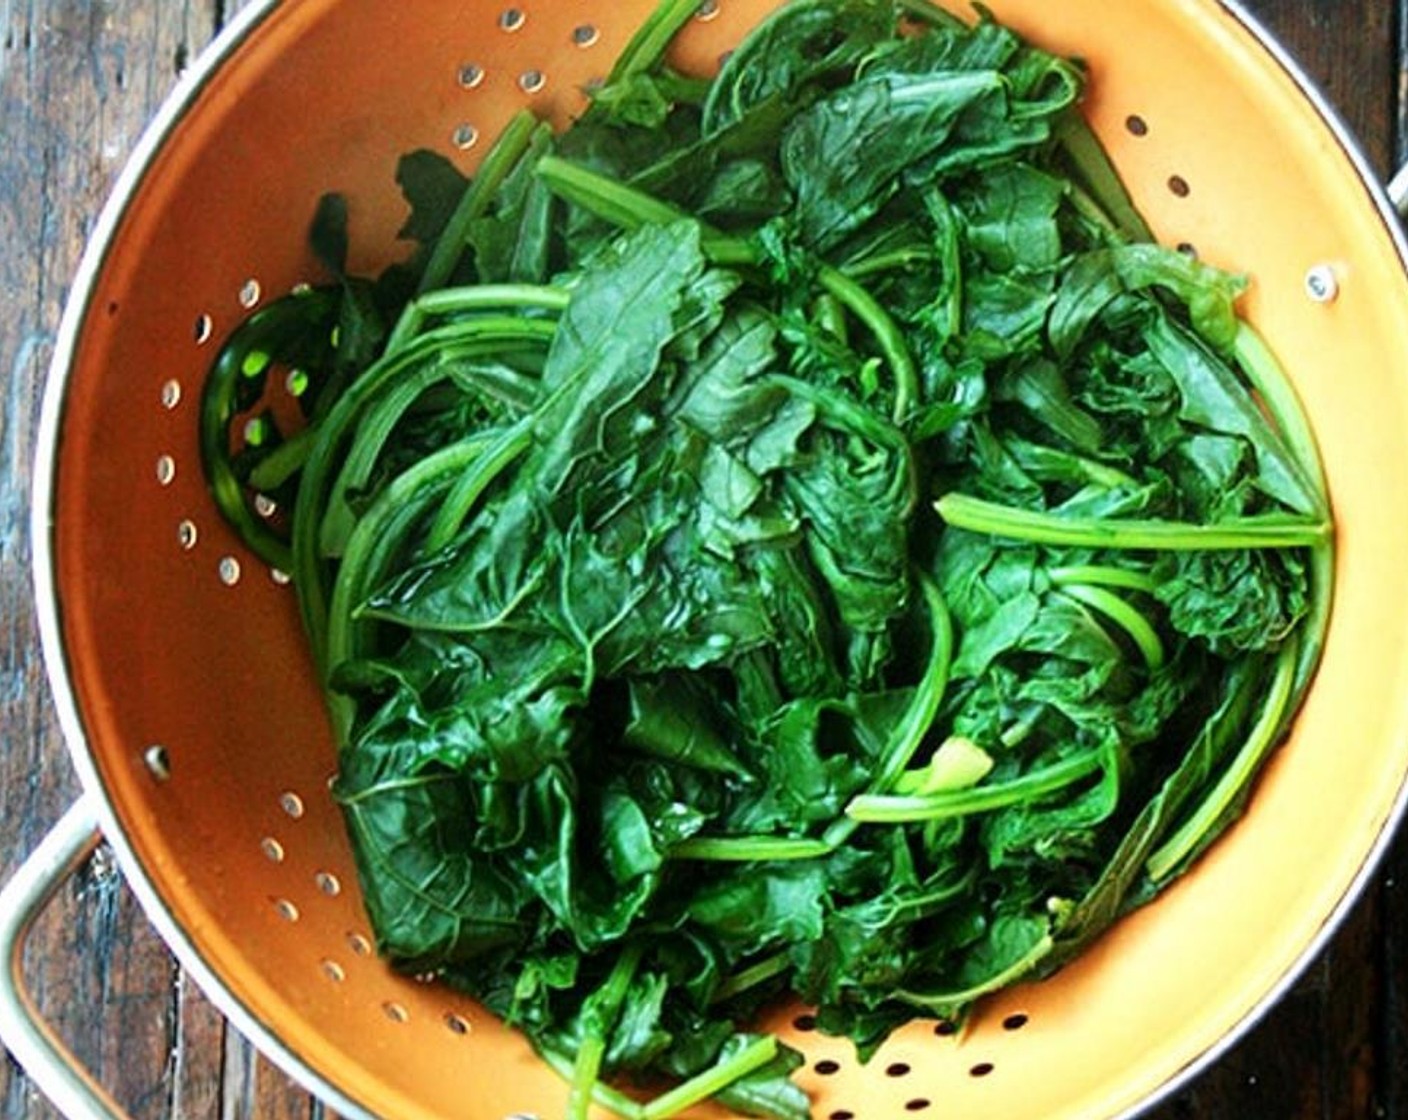 step 1 Bring a large pot of salted water to a boil, add Chard (11 cups) or your choice of greens and simmer for 5 minutes. Remove from pot and drain well, patting leaves dry with a paper or kitchen towel.